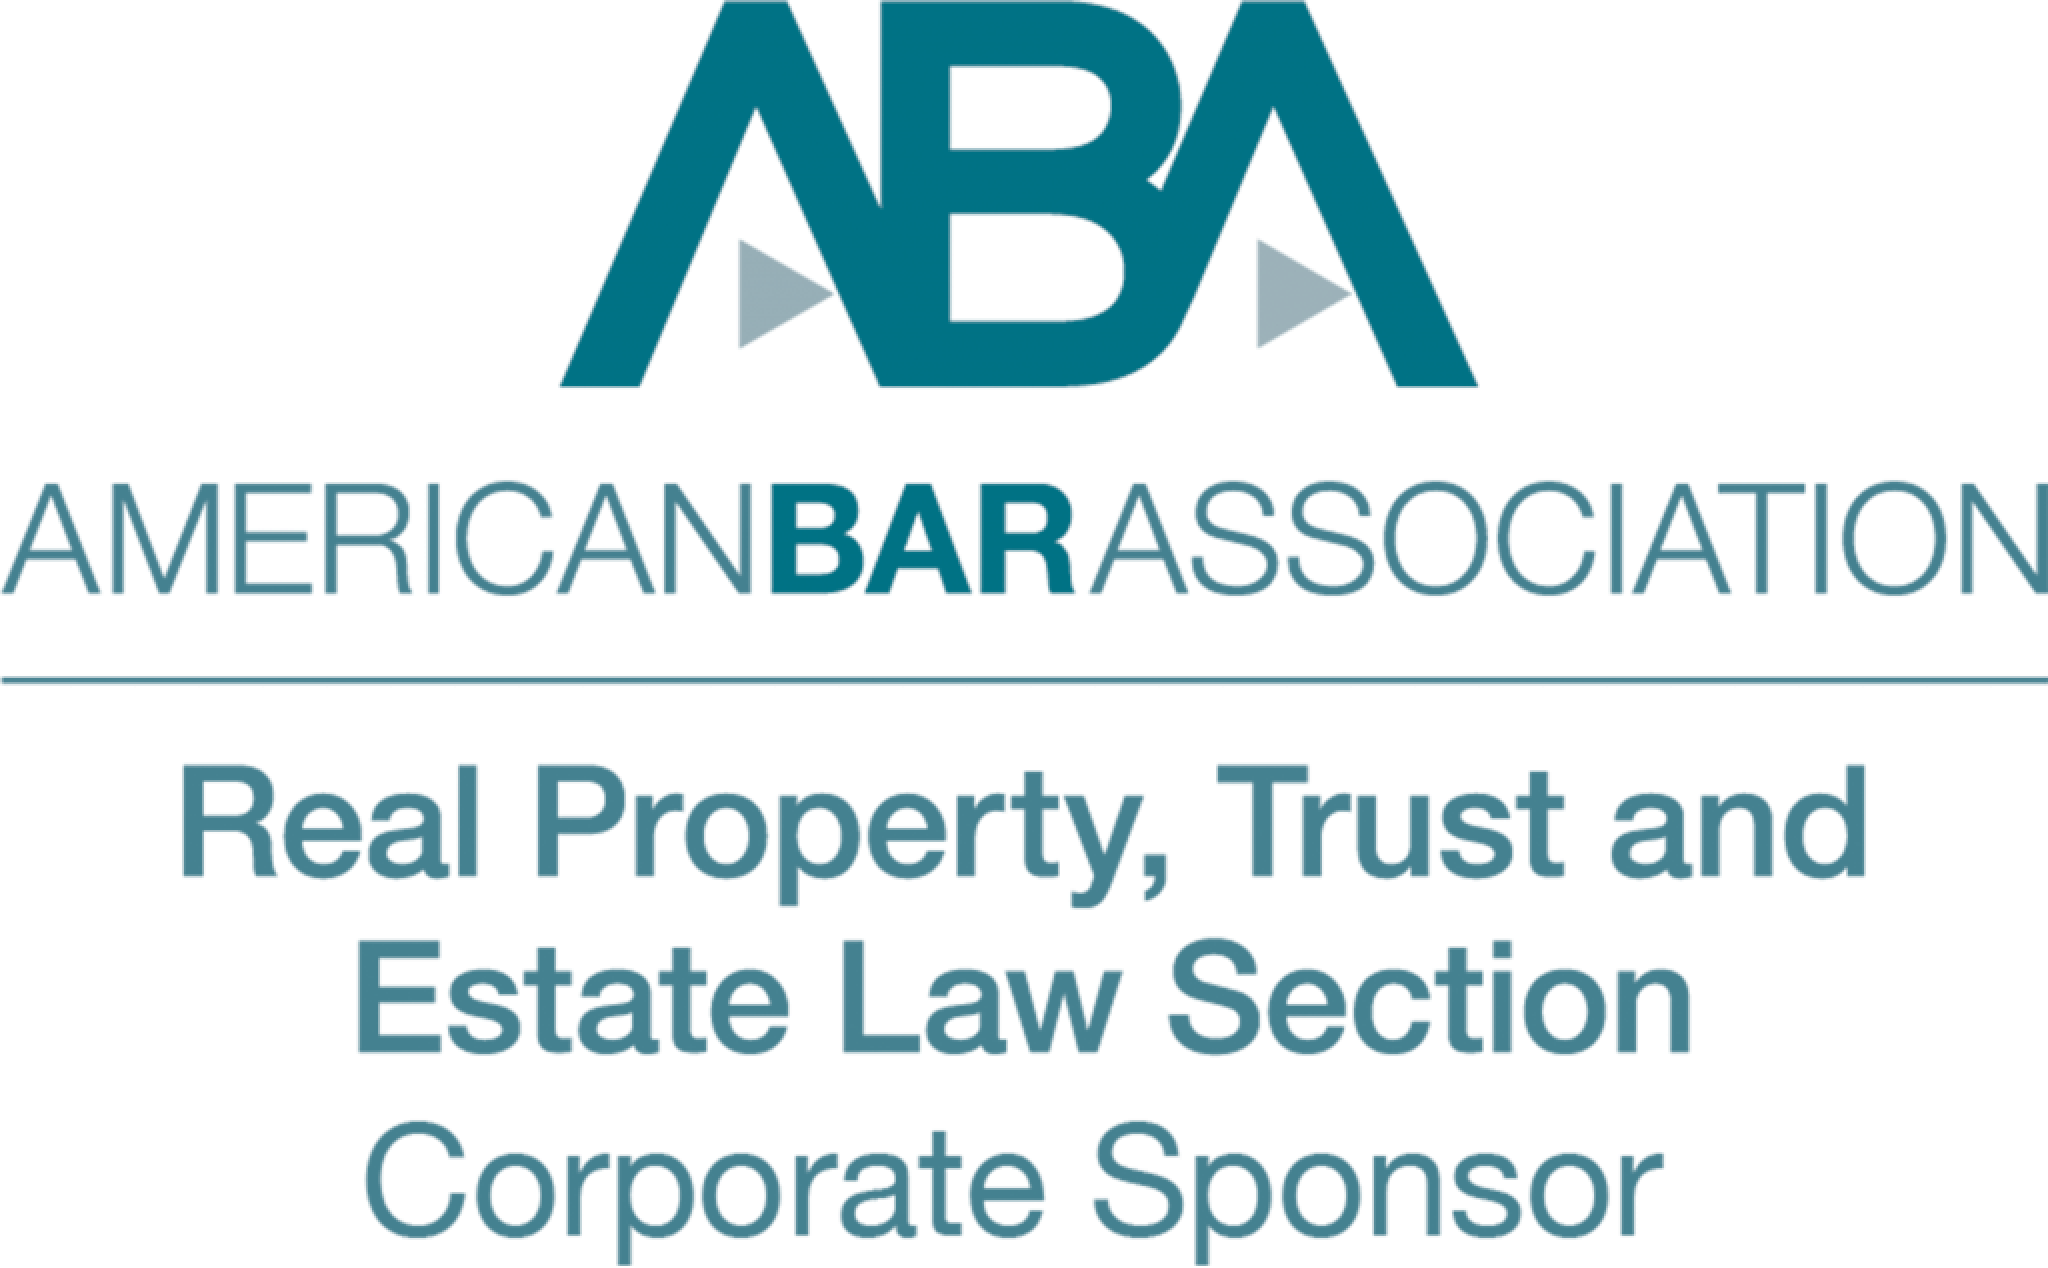 American Bar Association Real Property, Trust and Estate Law Section